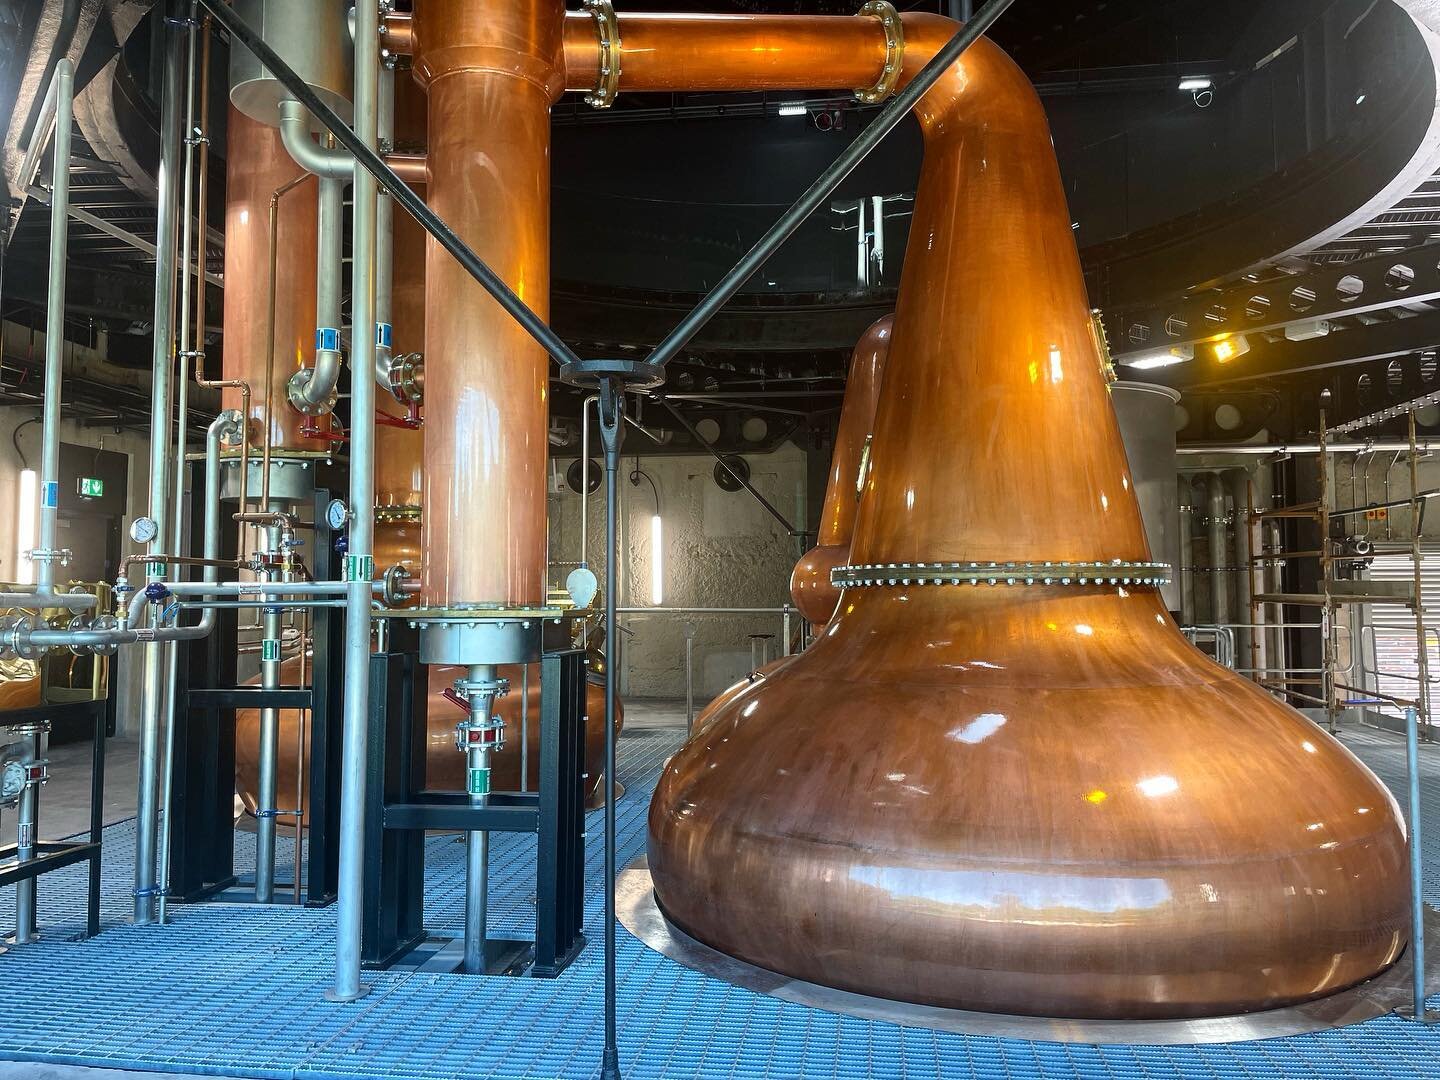 Fascinating to visit some of the newer distilleries in Ireland and witness the investment and scale involved.
Hard to believe in the 1980s Ireland had barely two distilleries open until John Teeling came along and started distilling whiskey at the Co